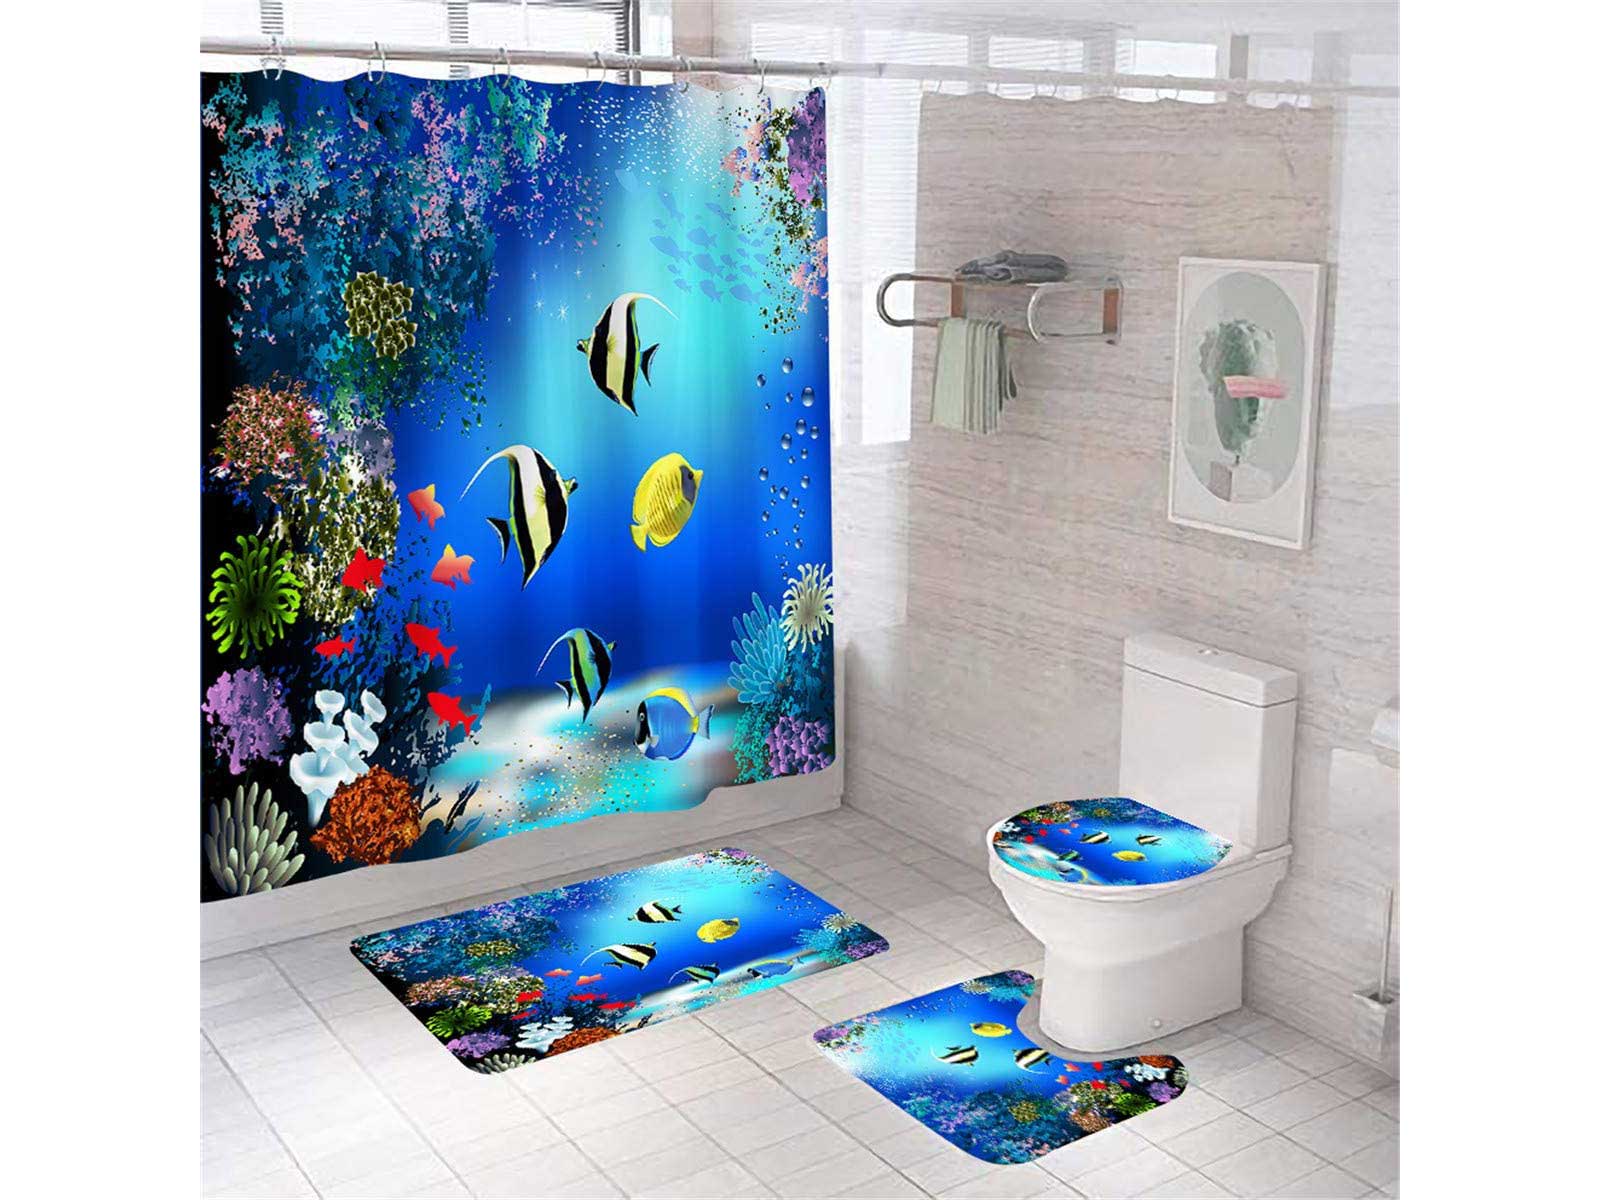 Tropical Fish Shower Curtain Sets with Rugs for Bathroom Tropical Marine Theme Bathroom Sets with Waterproof Durable Shower Curtains Non-slip Rugs and 12 Hooks